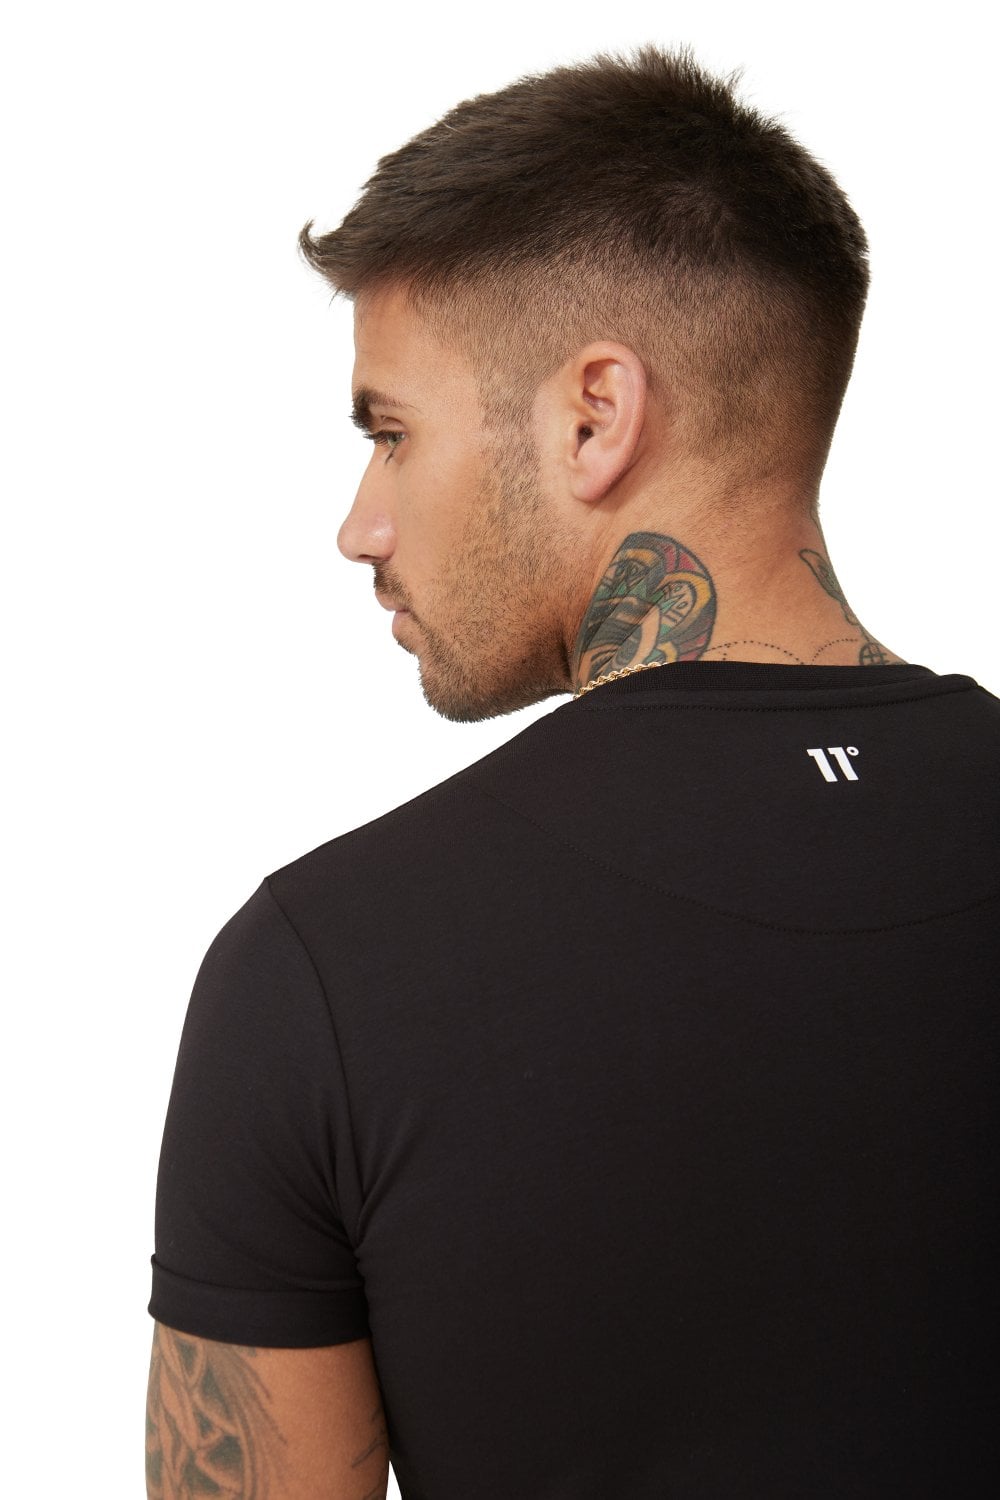 11 Degrees Core Muscle Fit T-Shirt - Black